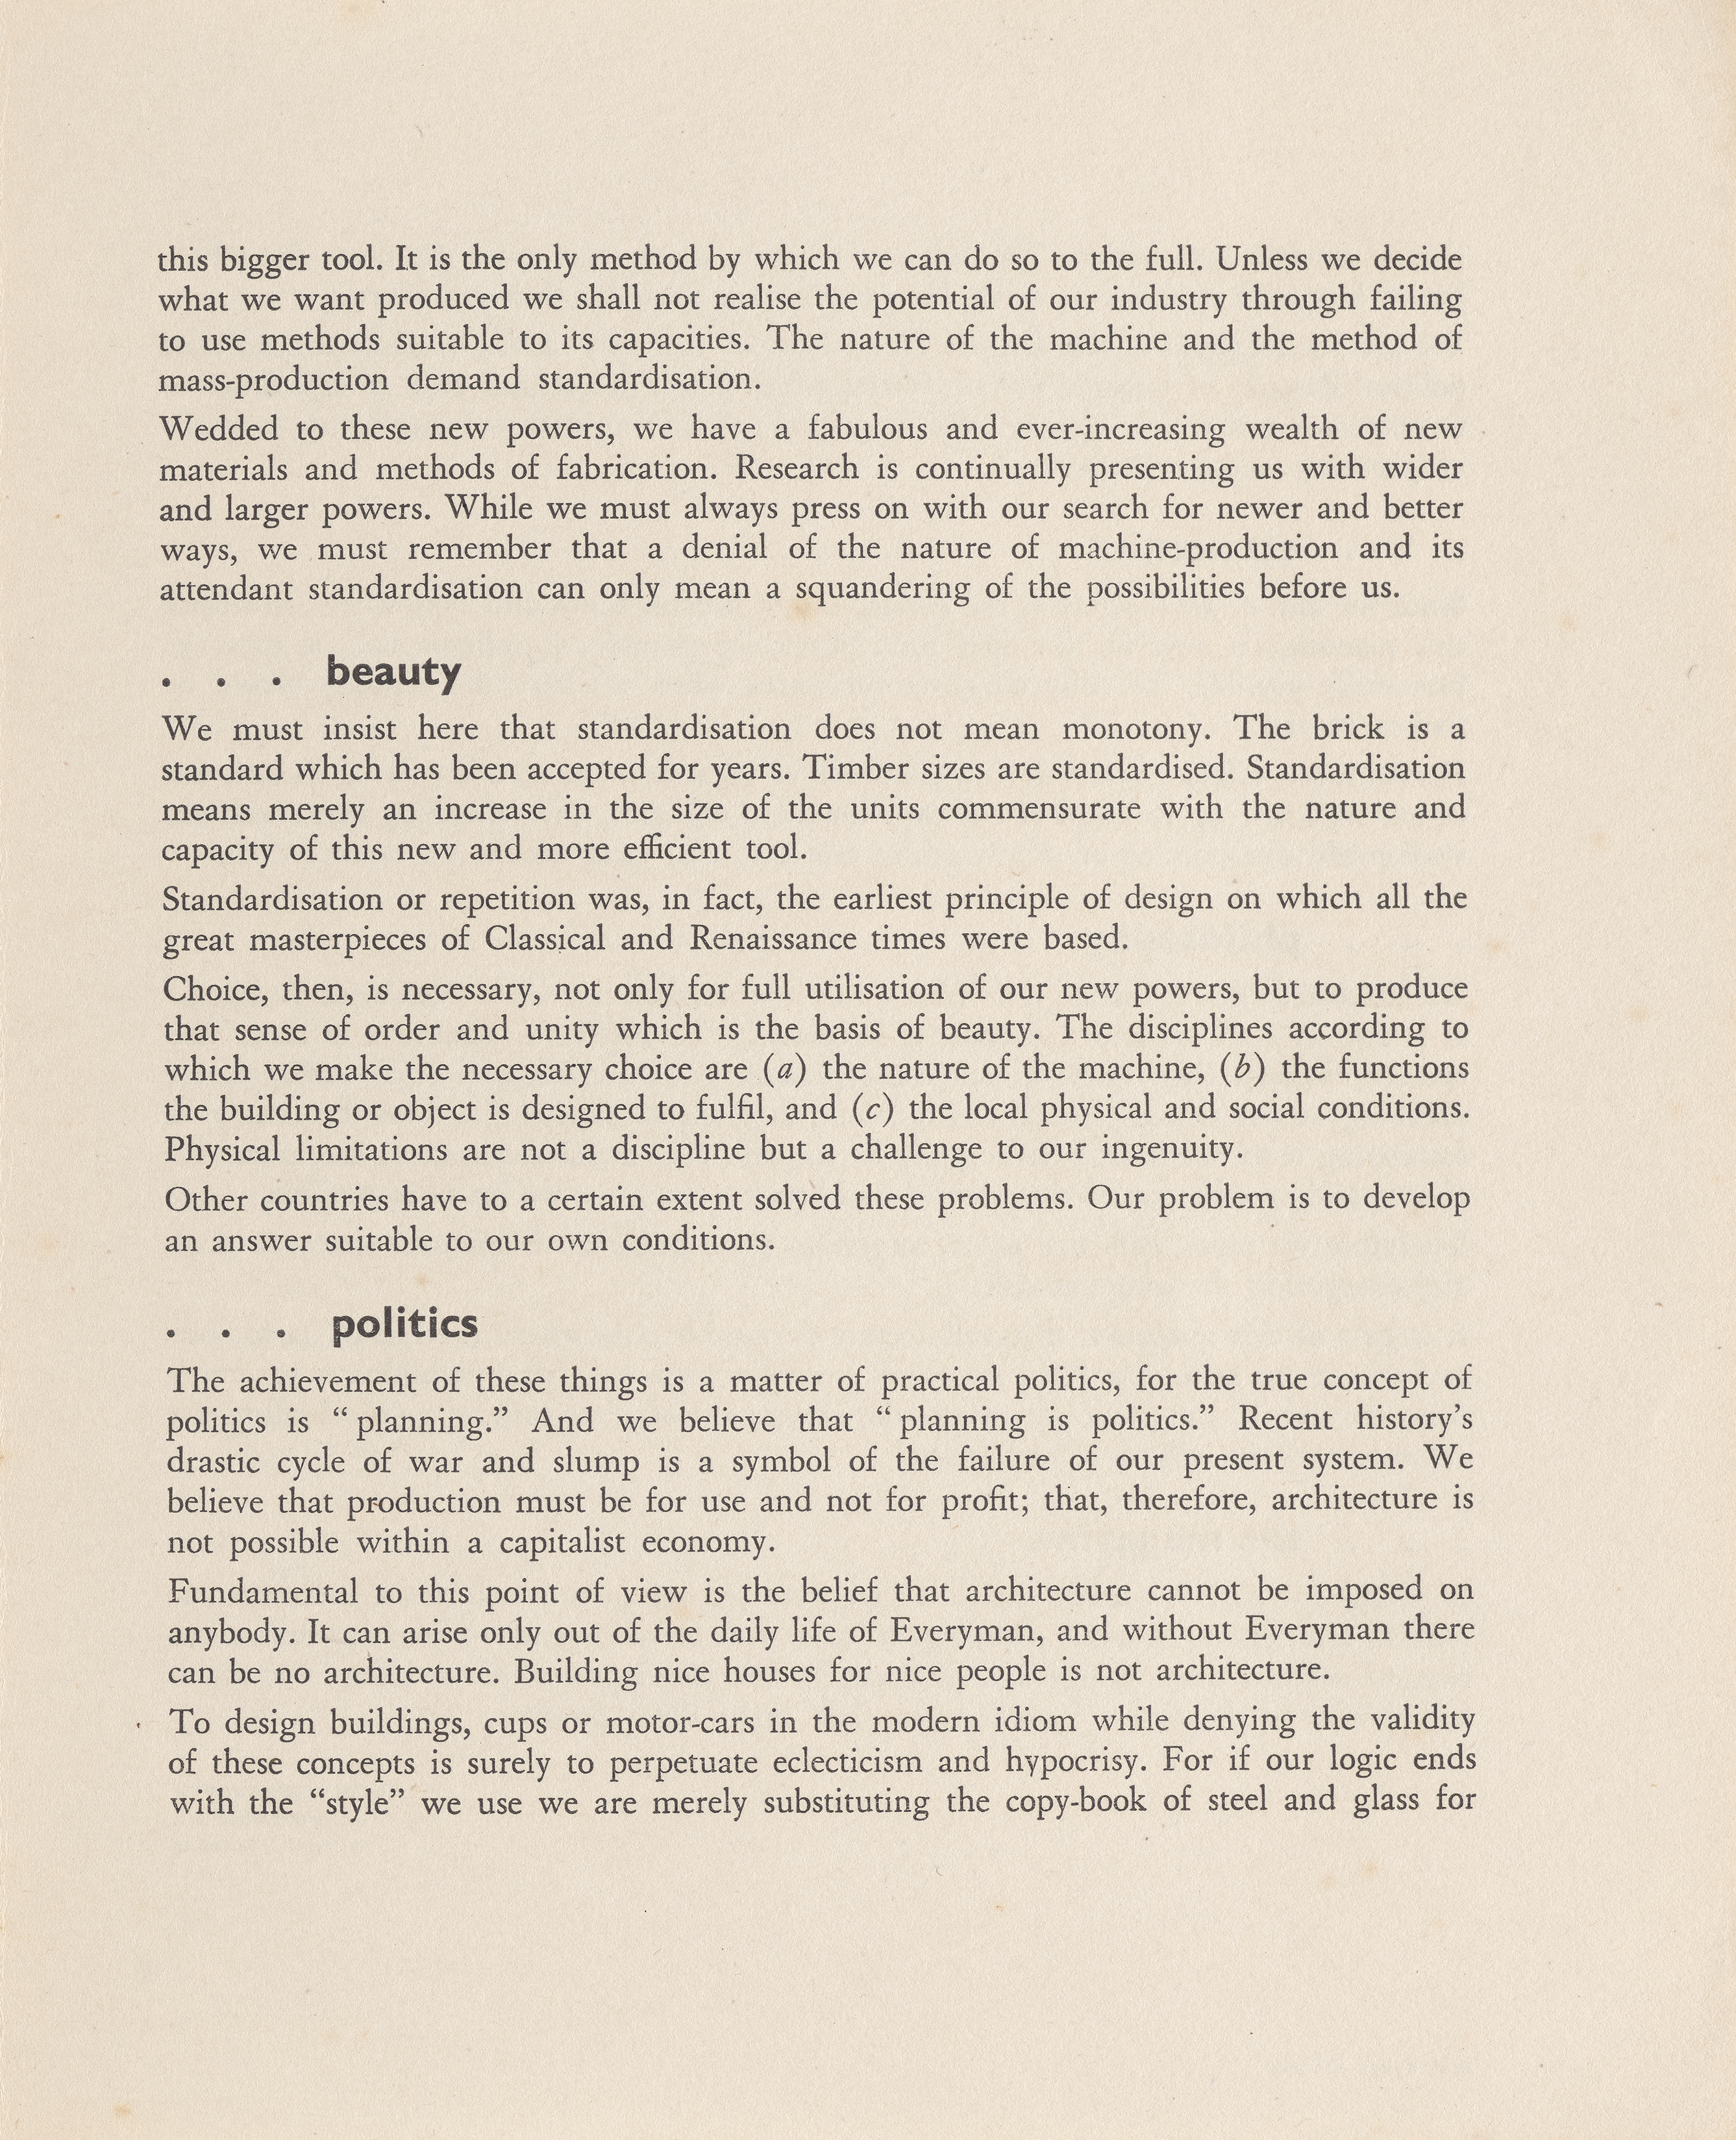 A scan of text on sepia-coloured paper